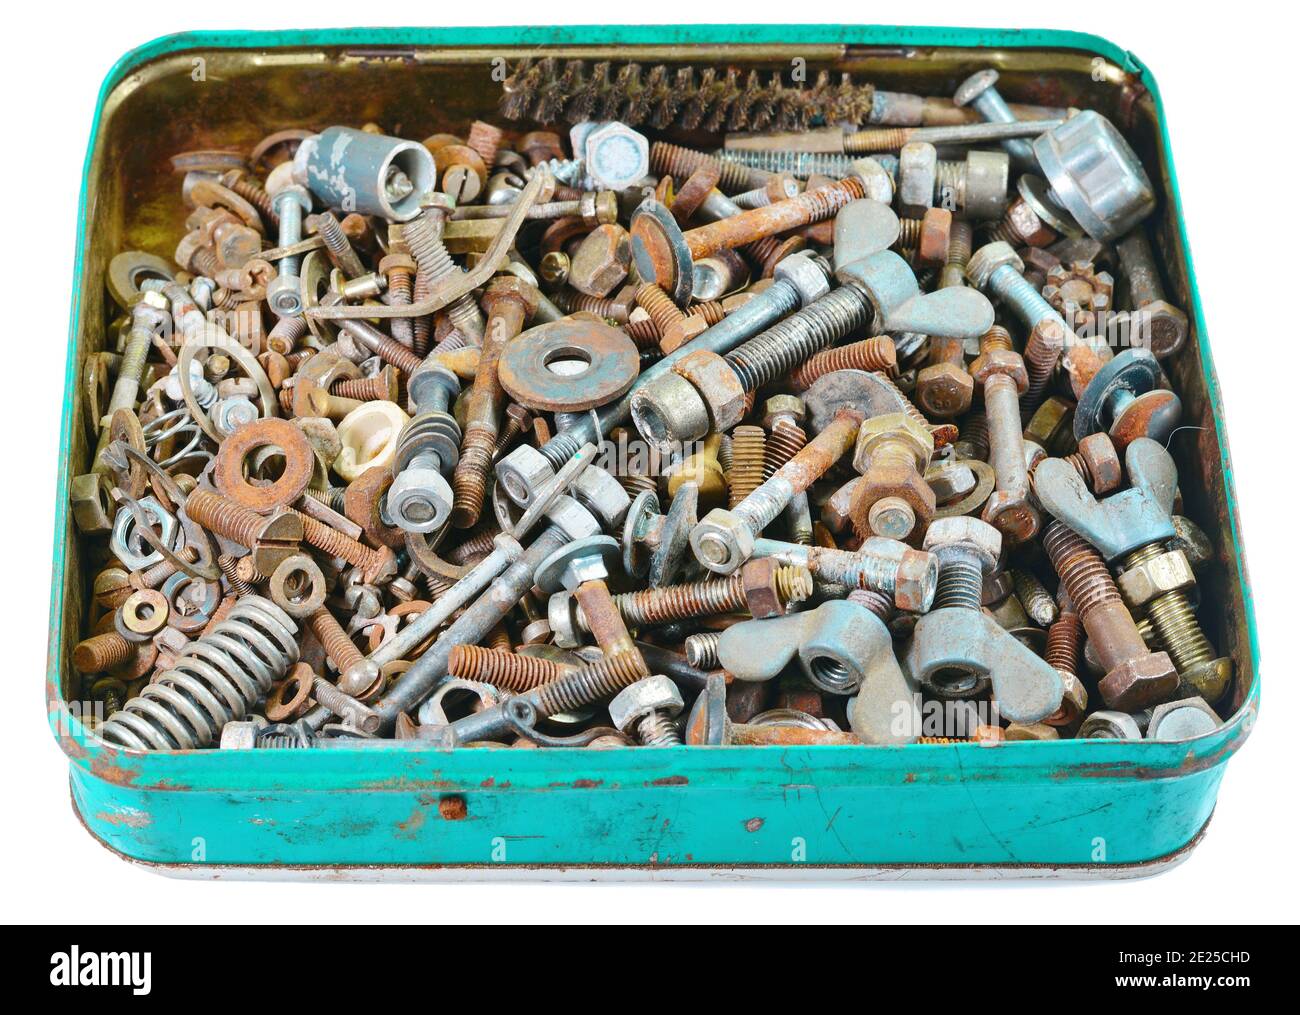 Old rusty bolts, screws, nuts, screws, brackets, various metal details in a metal box. Stock Photo